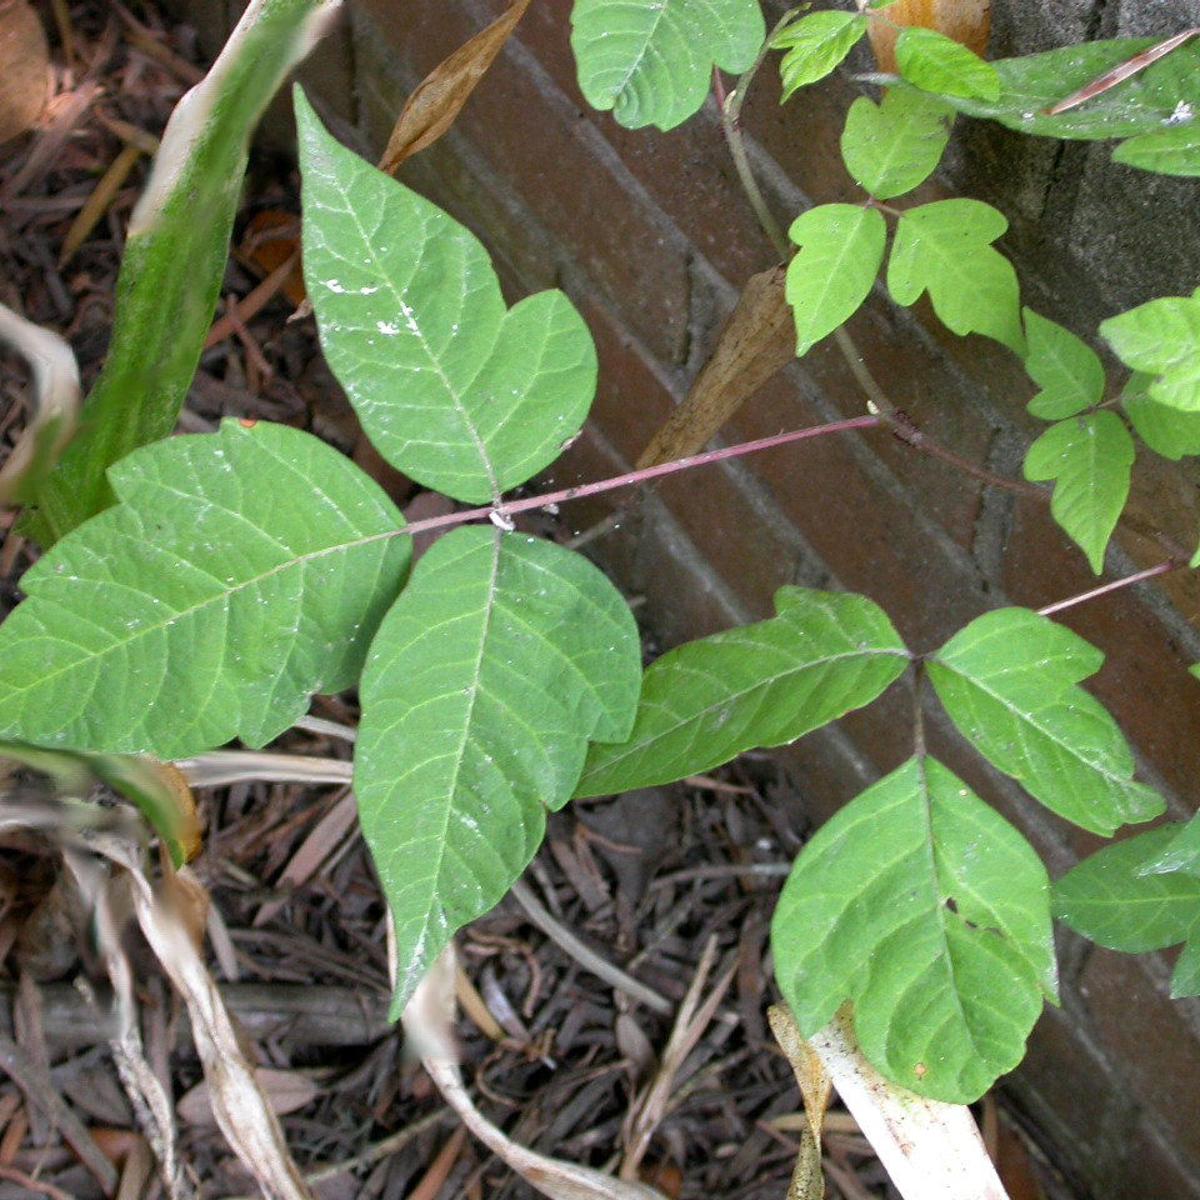 How to Safely Remove Poison Ivy